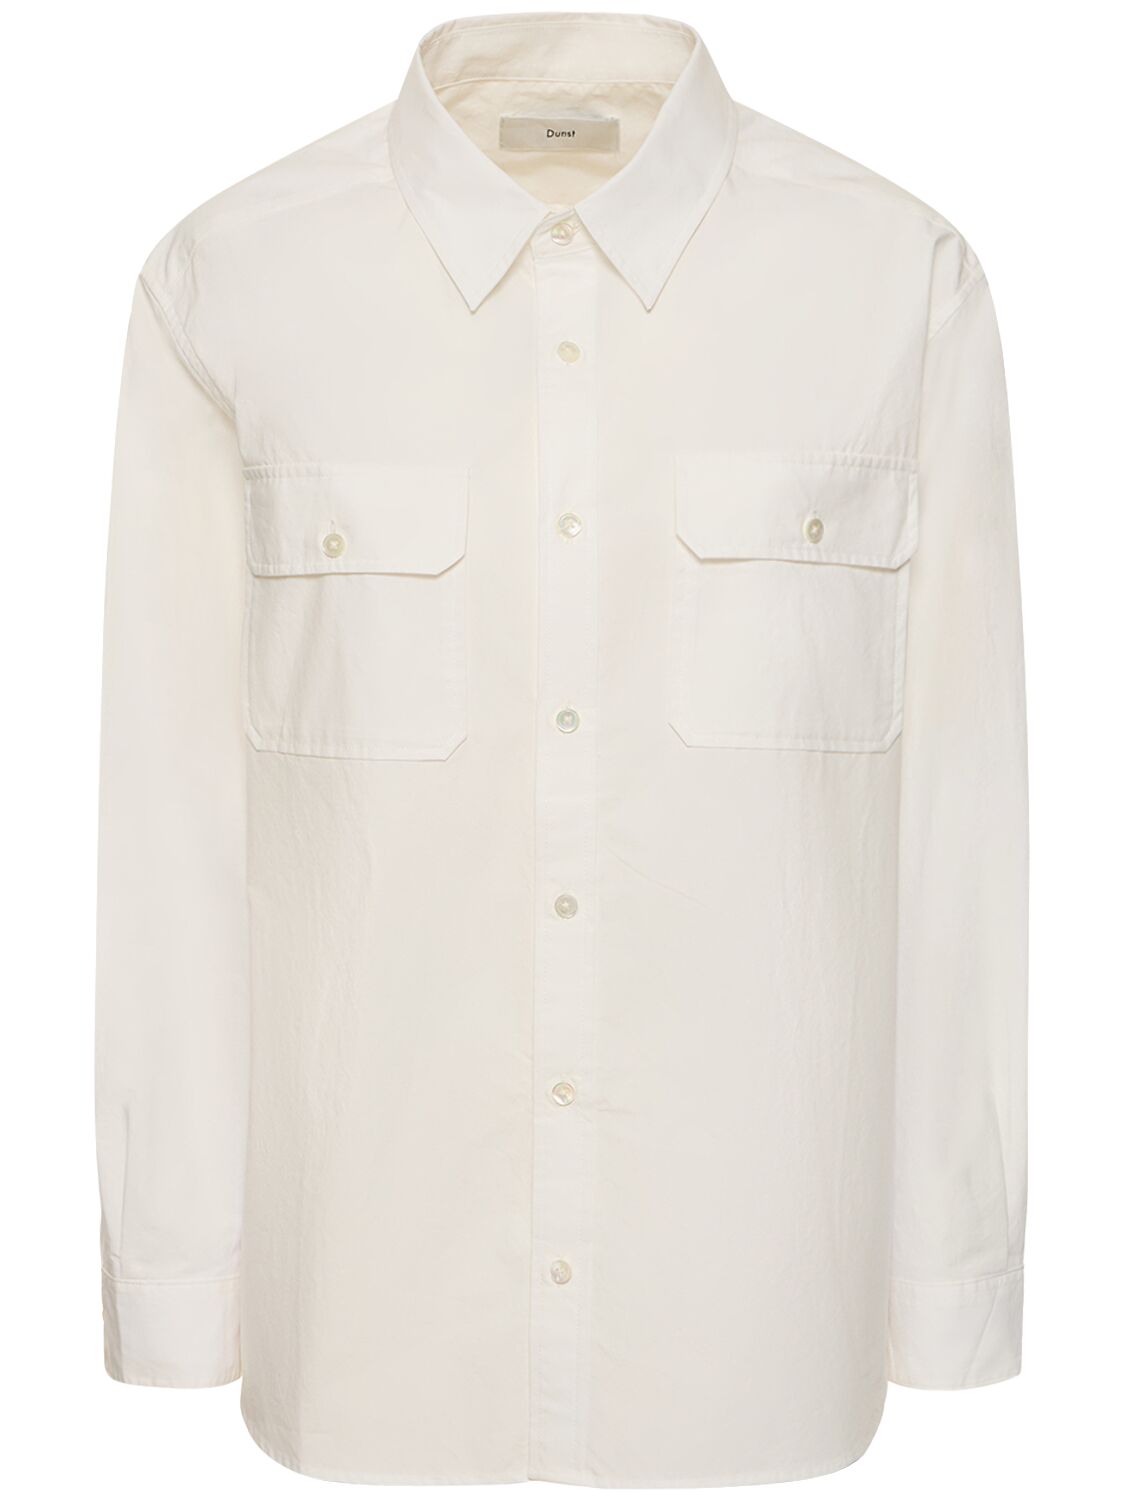 Dunst Out Pocket Cotton Shirt In White